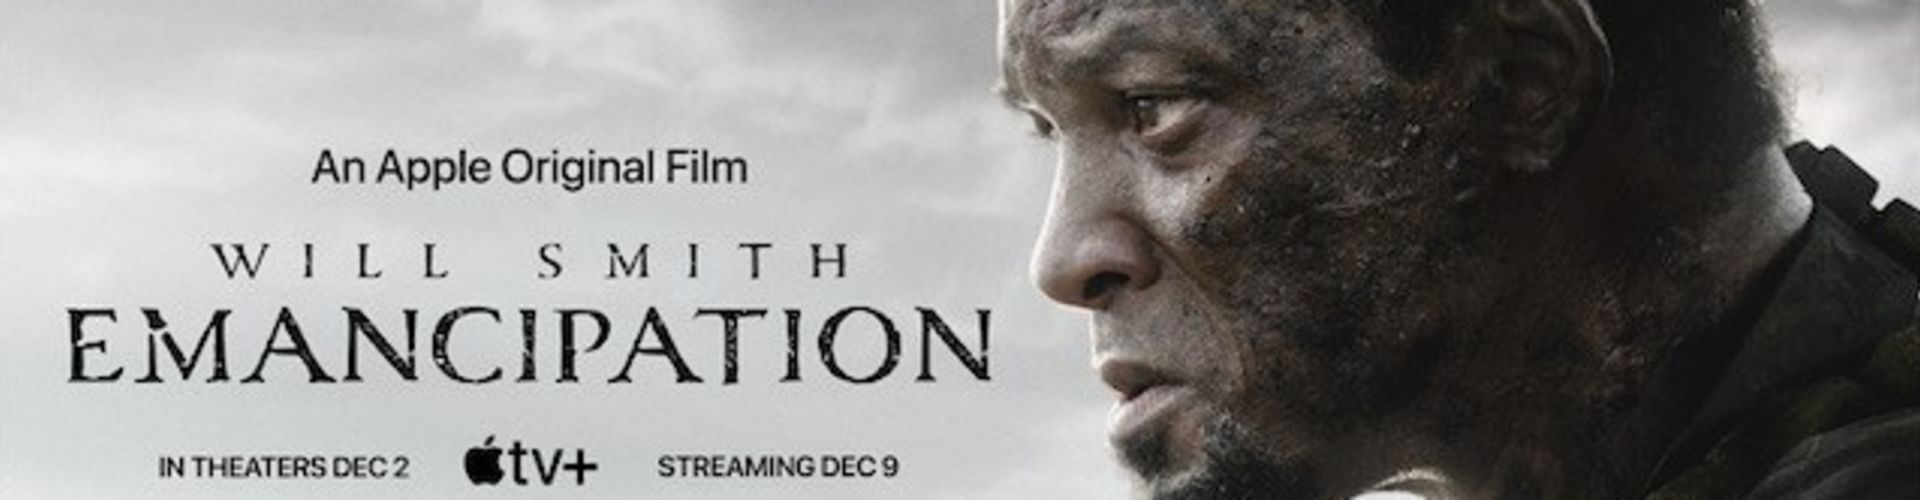 Emancipation New Trailer Is Out